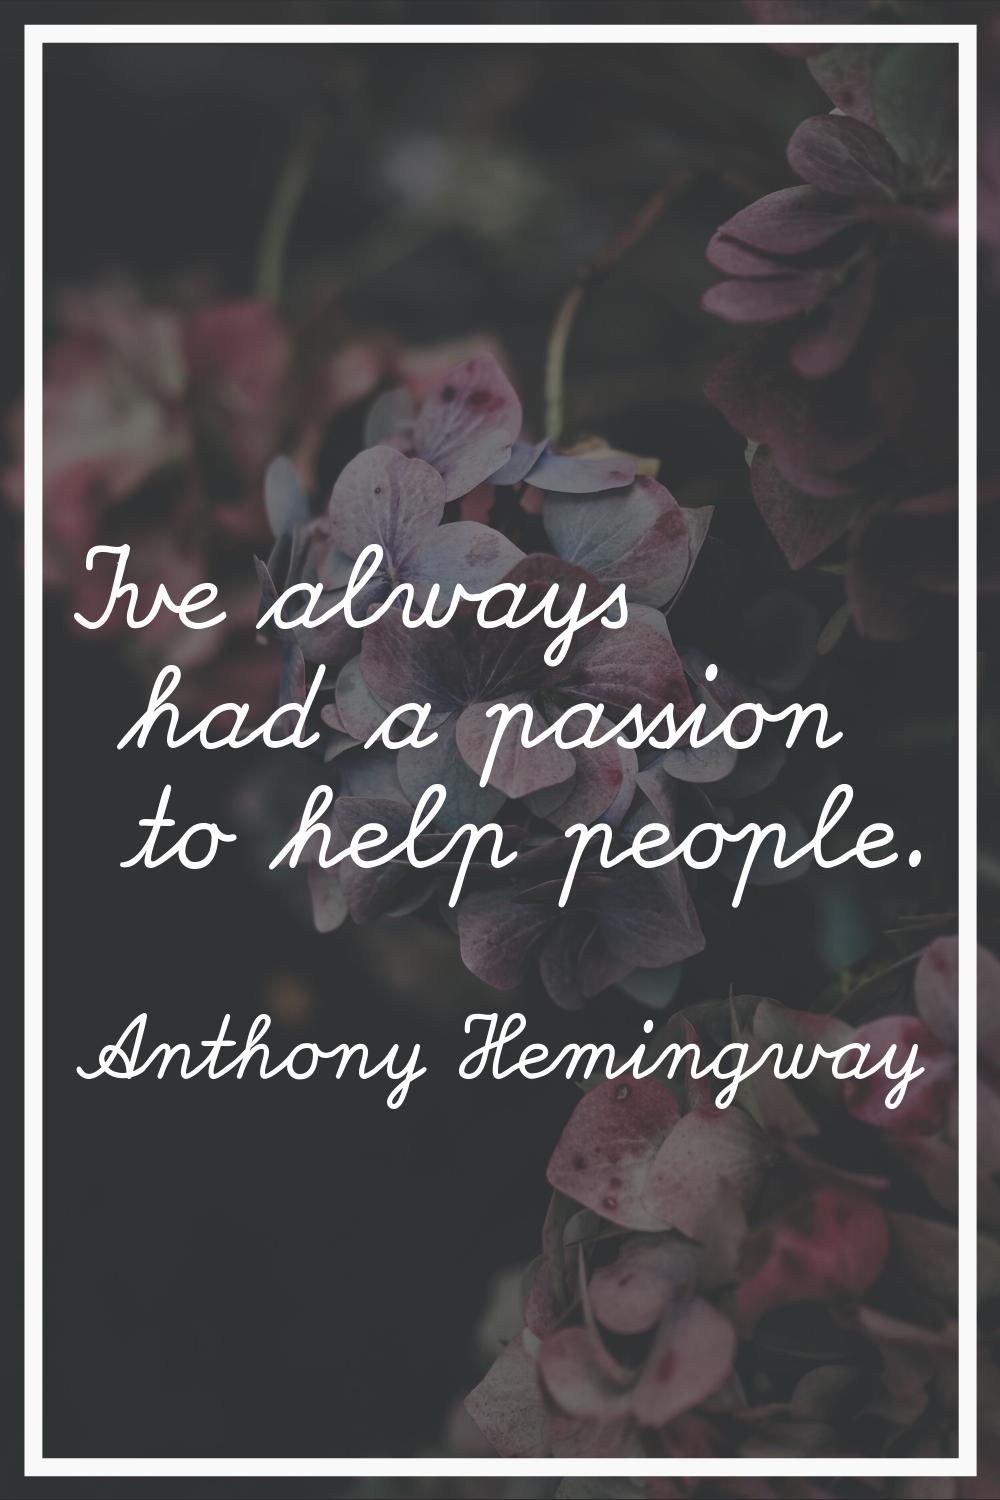 I've always had a passion to help people.